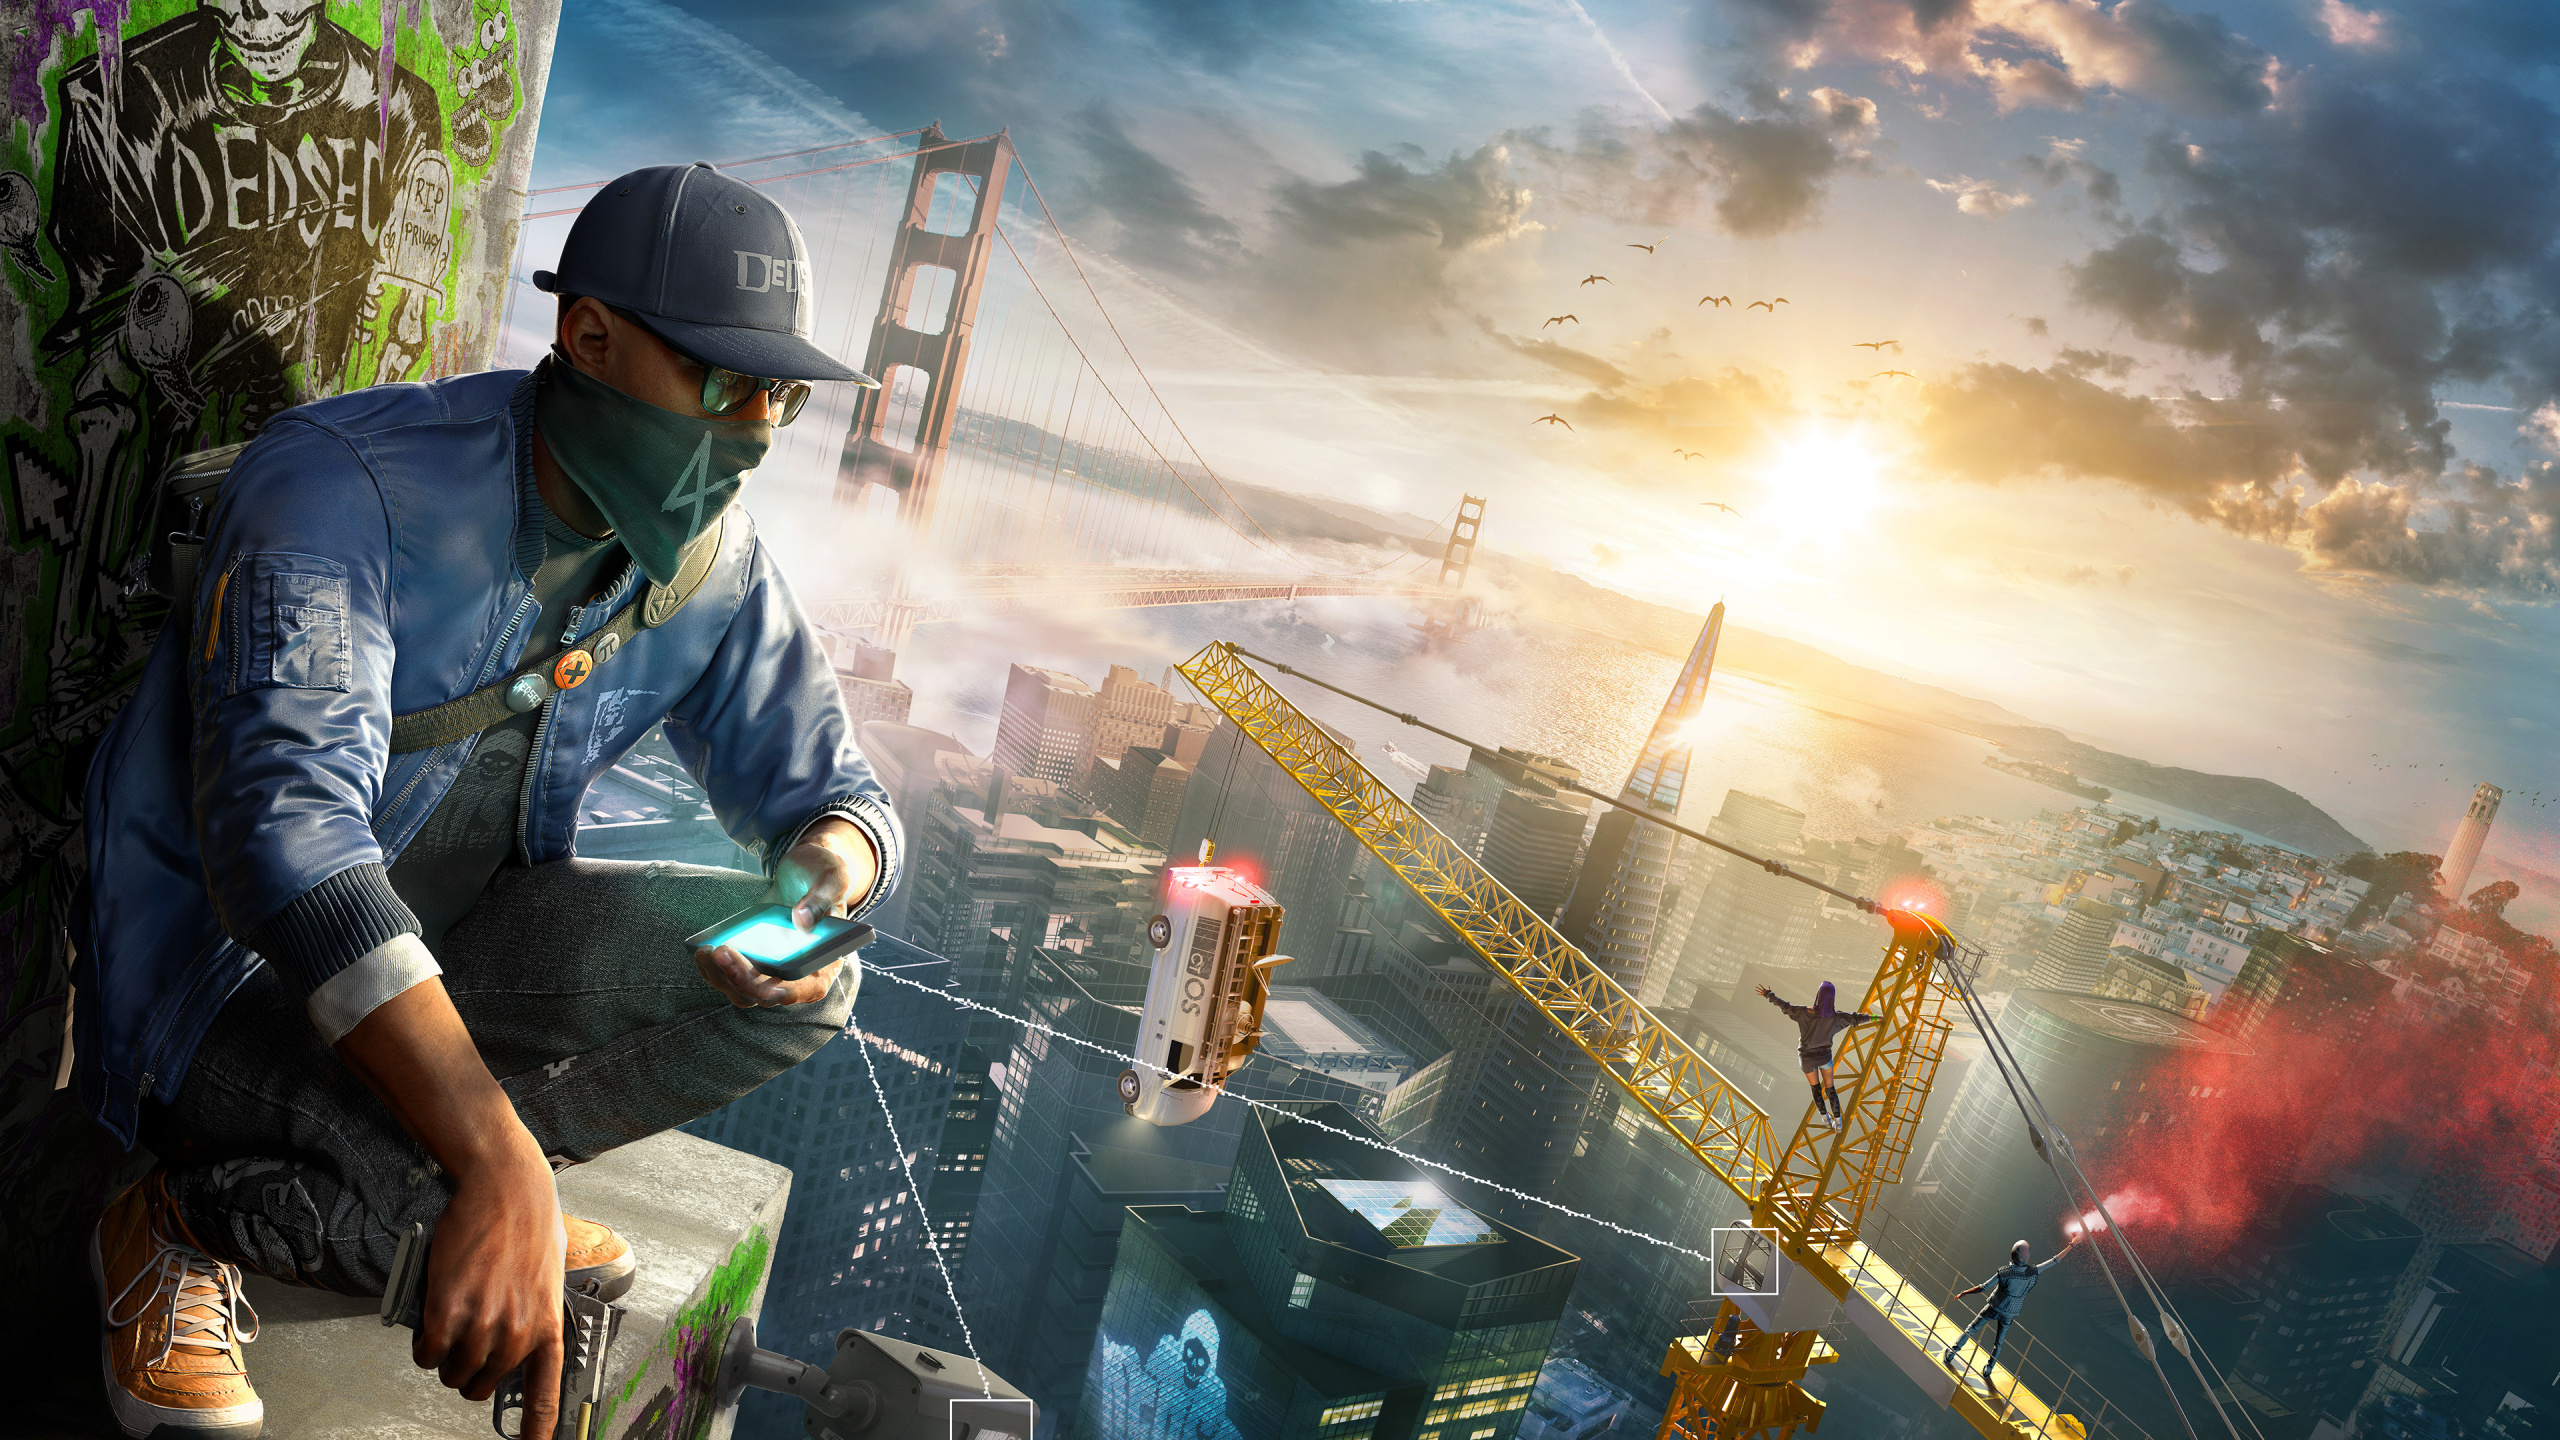 Watch Dogs 2, Watch Dogs, Ubisoft, Playstation 4, pc Game. Wallpaper in 2560x1440 Resolution